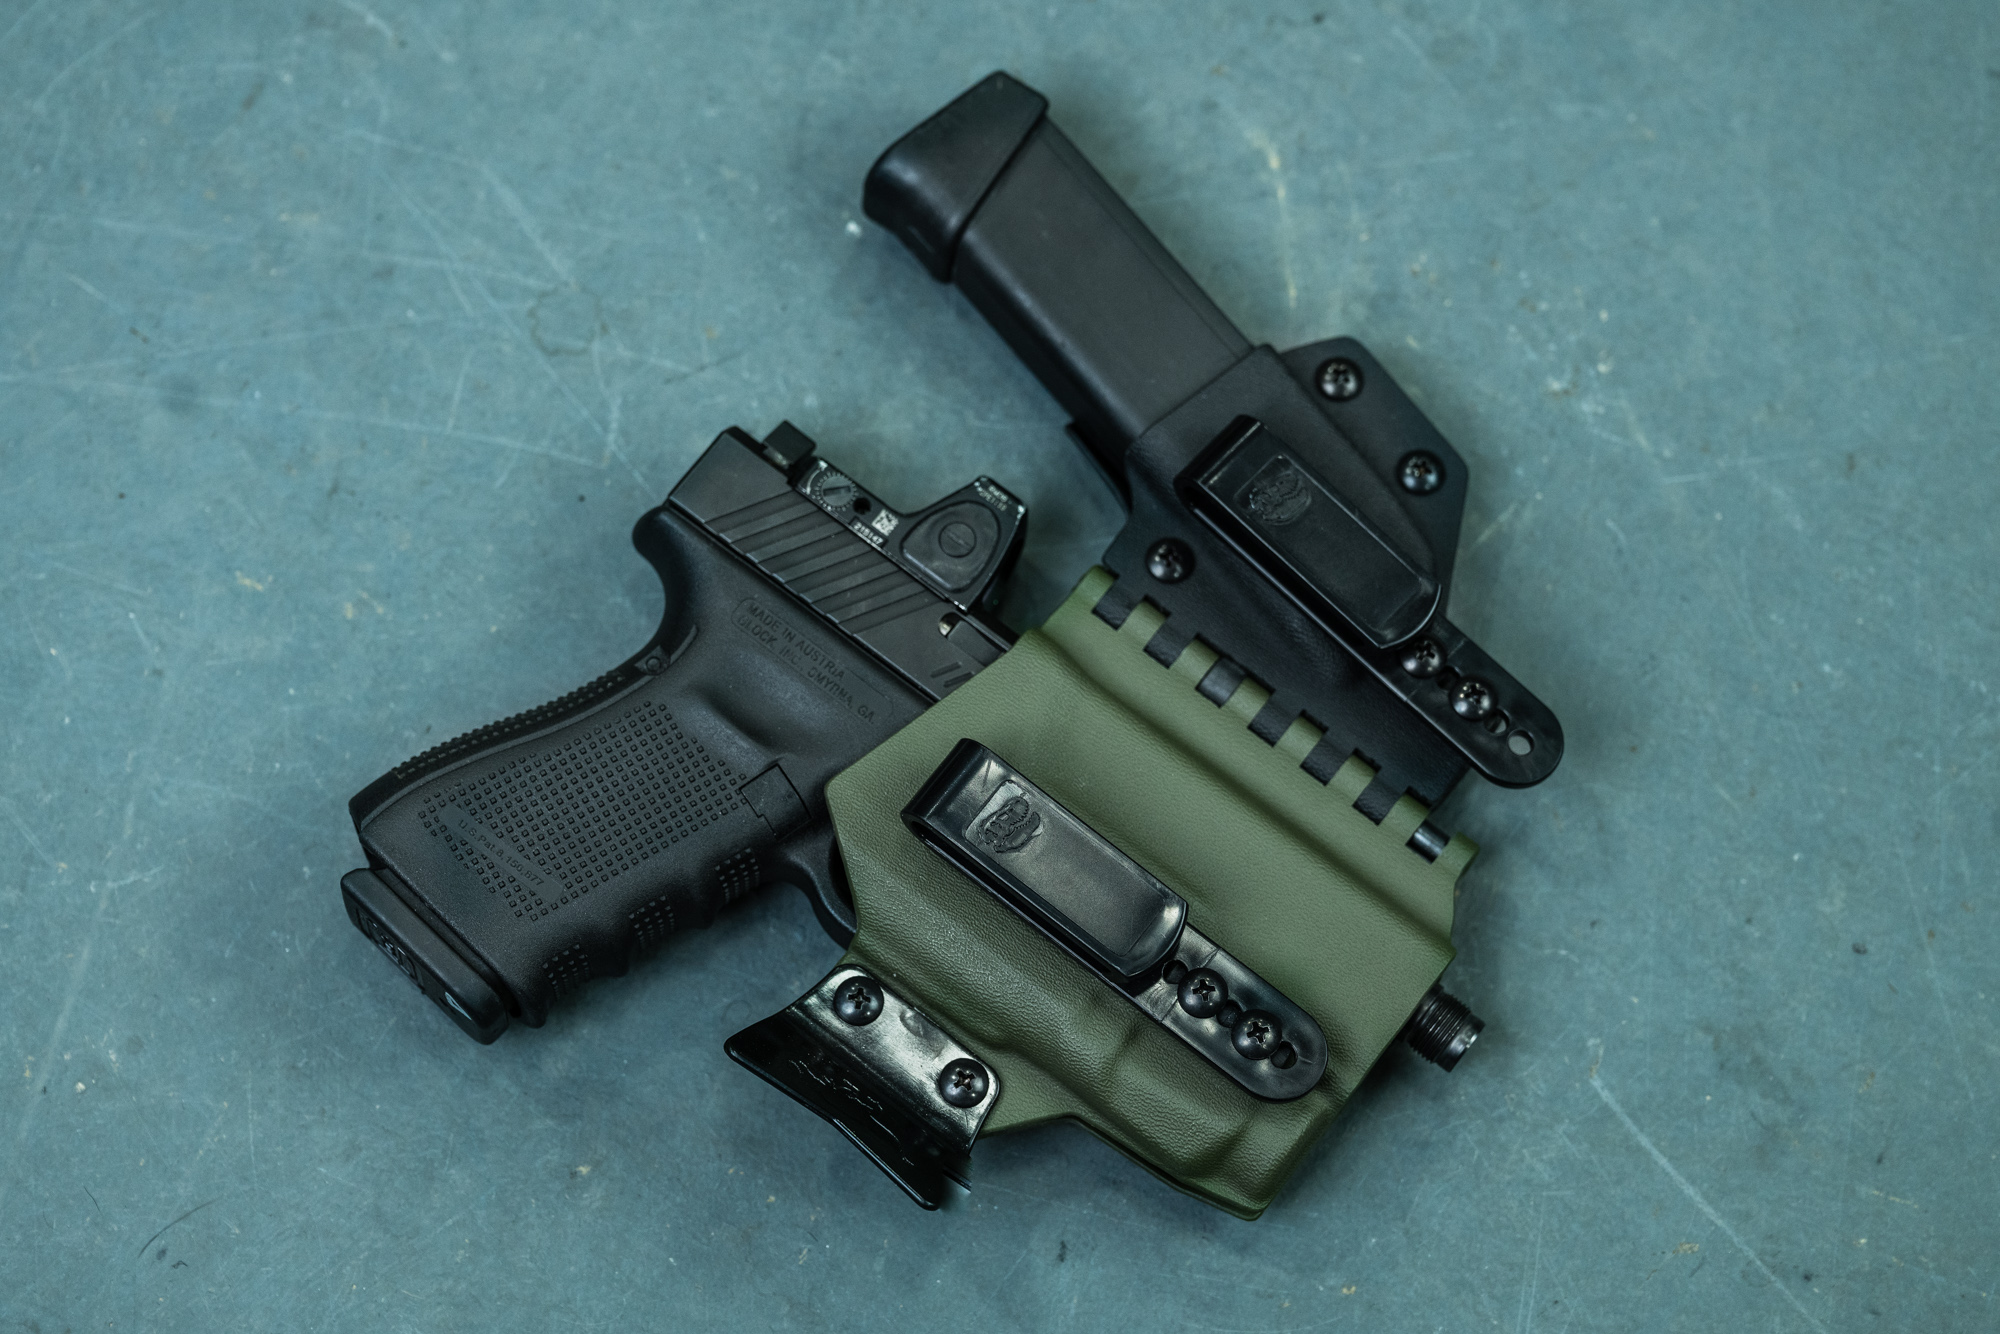 T.REX ARMS - Our Ranger Green Kydex is something else. Here is one